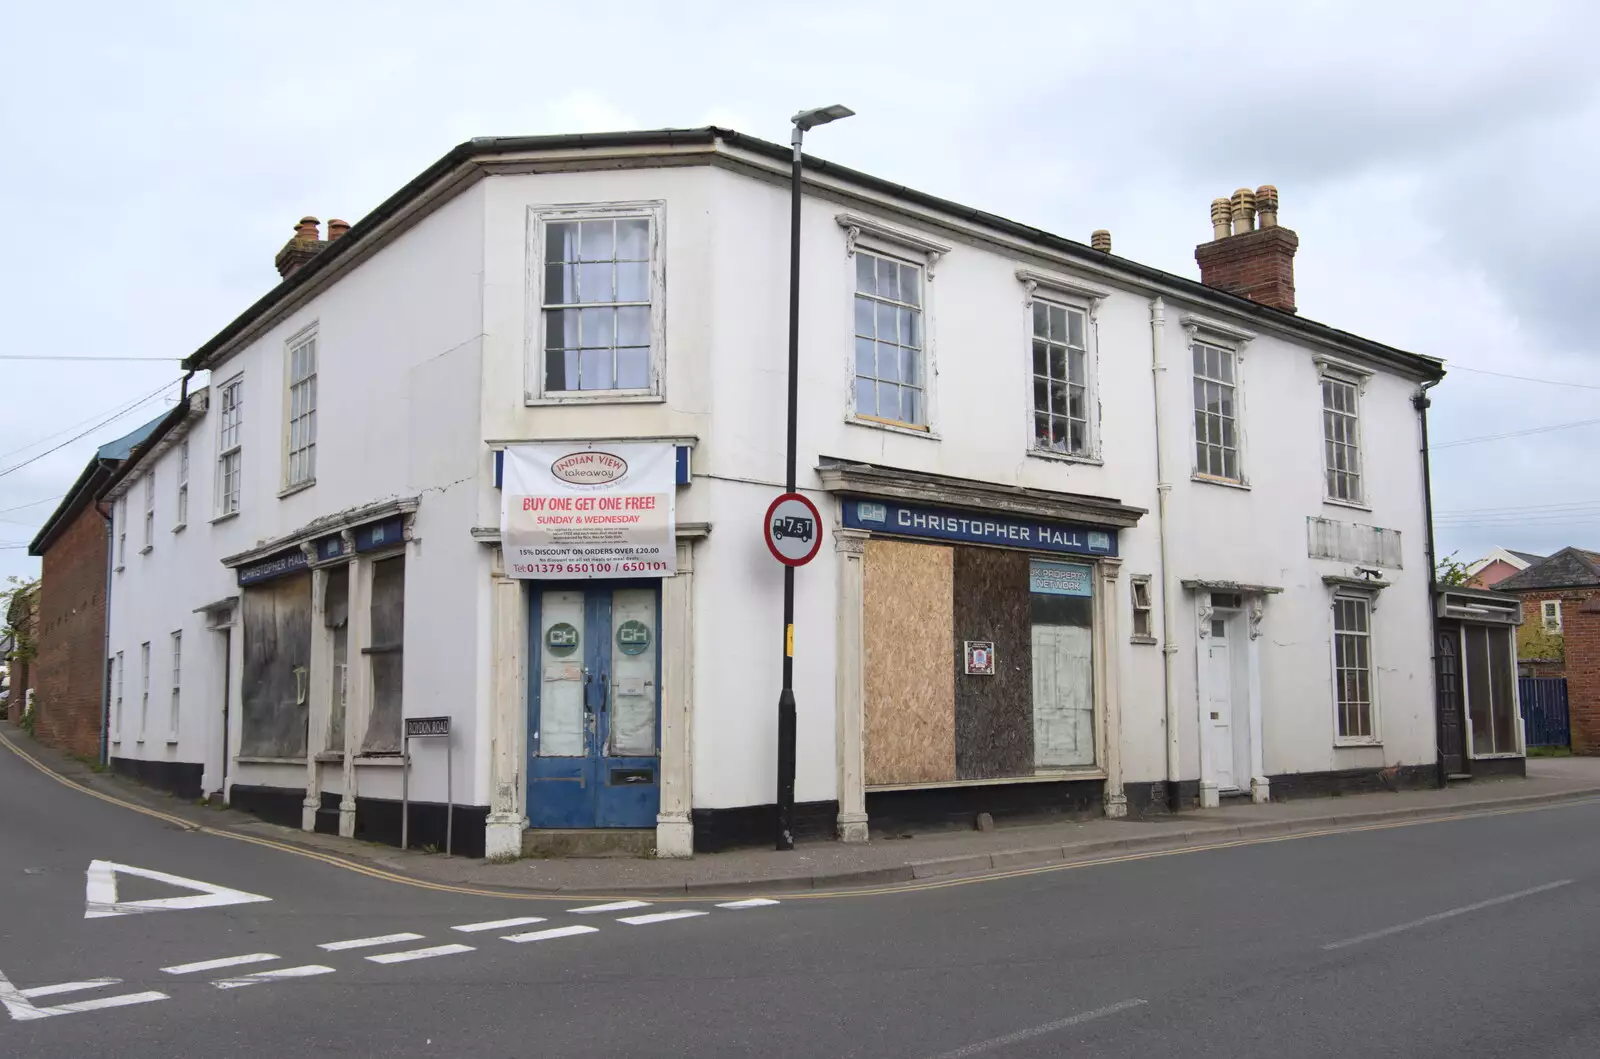 The derelict Christpher Hall and Diss Tandoori, from The Lost Pubs of Diss, Norfolk - 26th April 2023